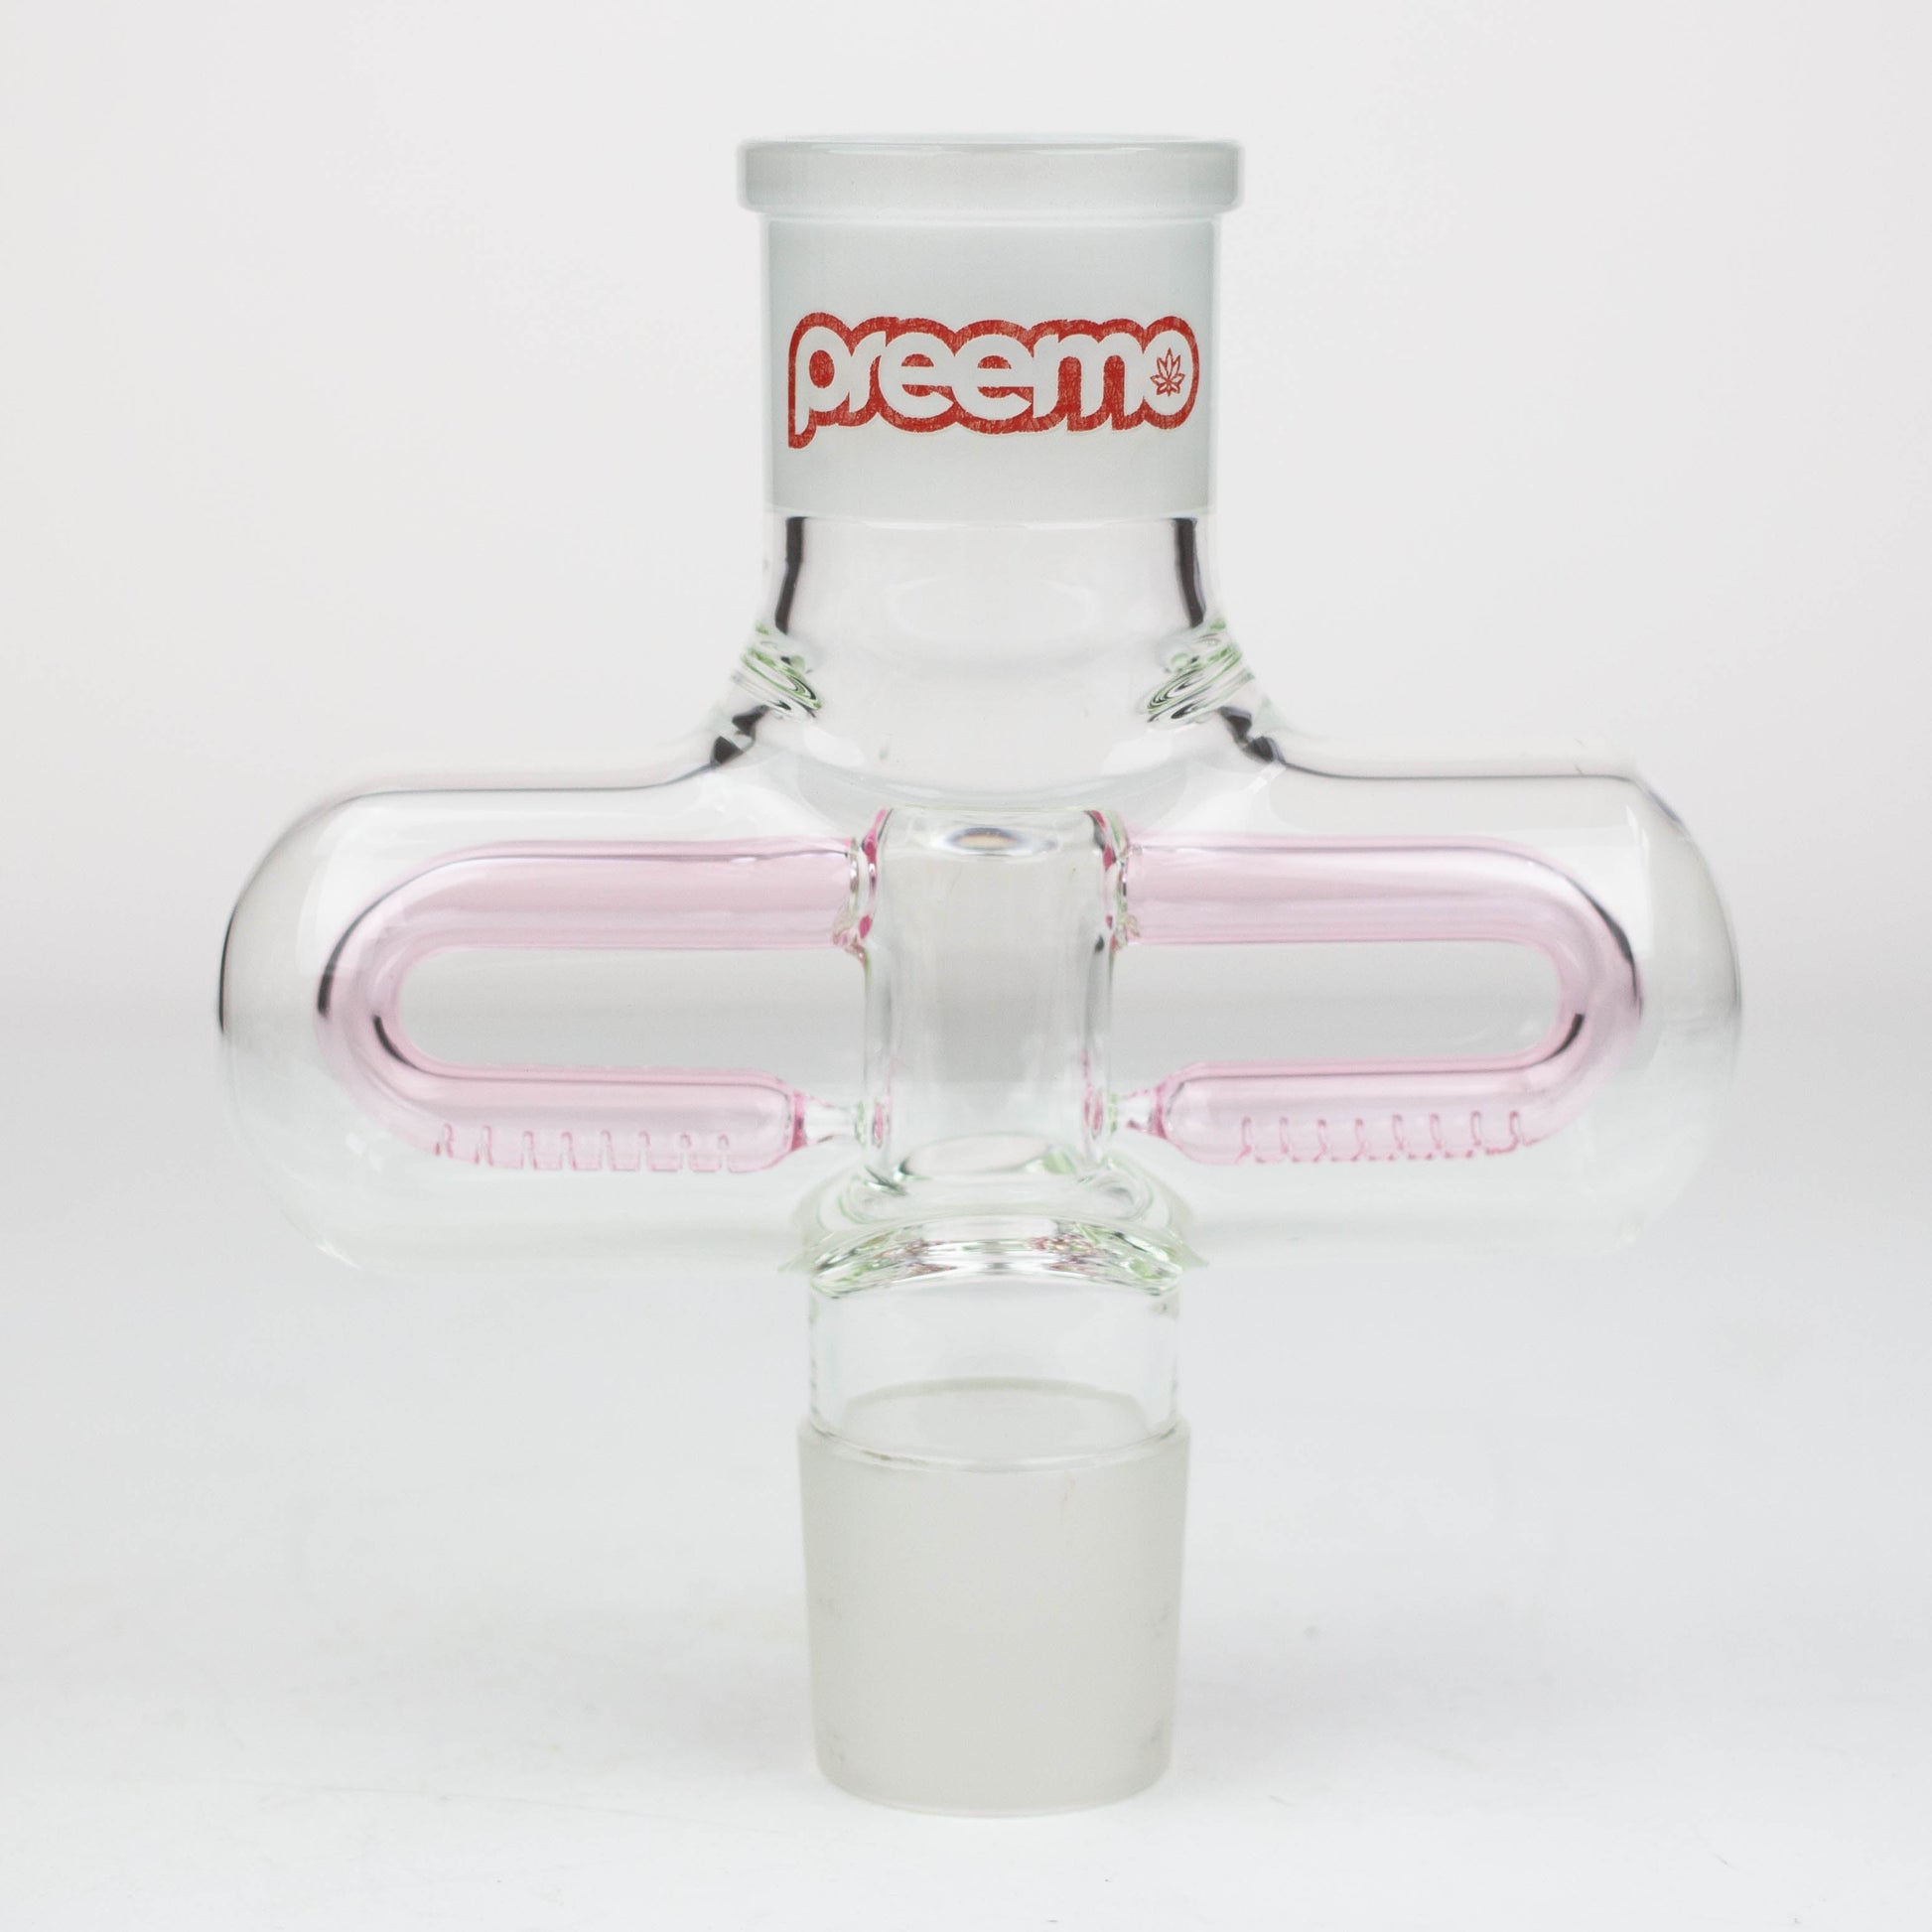 preemo - 6 inch Double Sided Inline Perc Middle [P009]_2